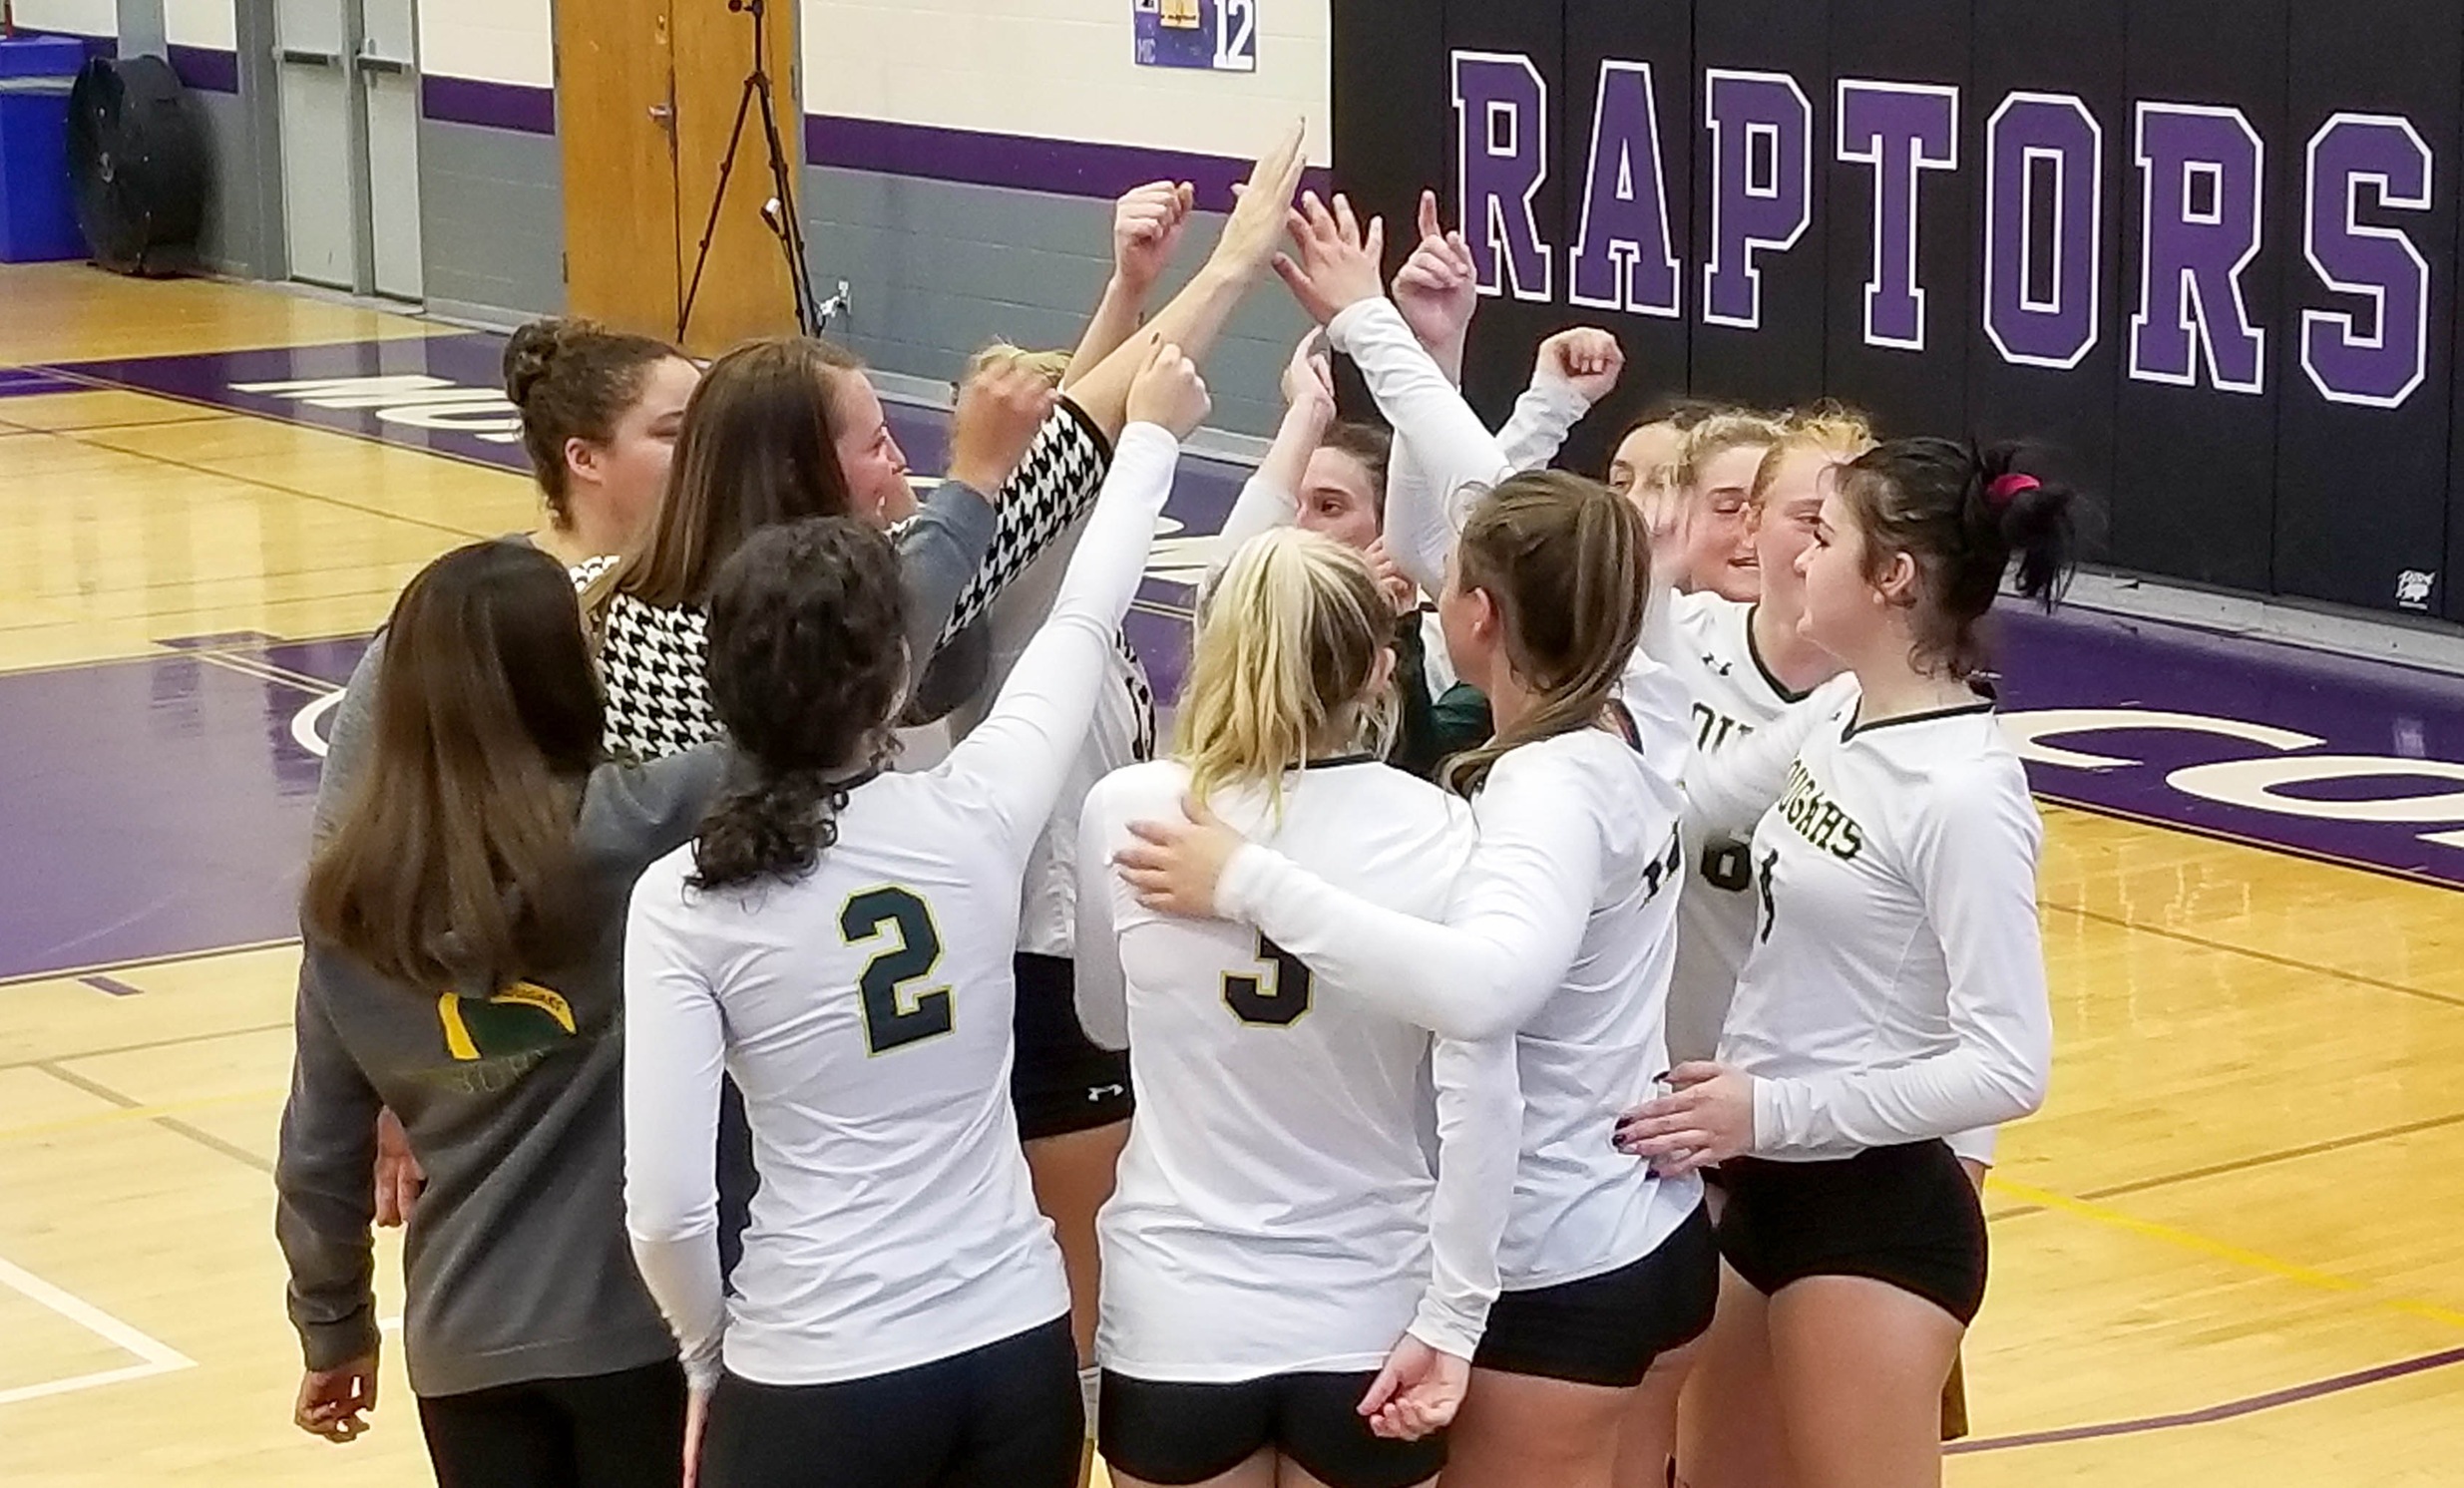 Volleyball season ends for FCC at Region 20 Tourney